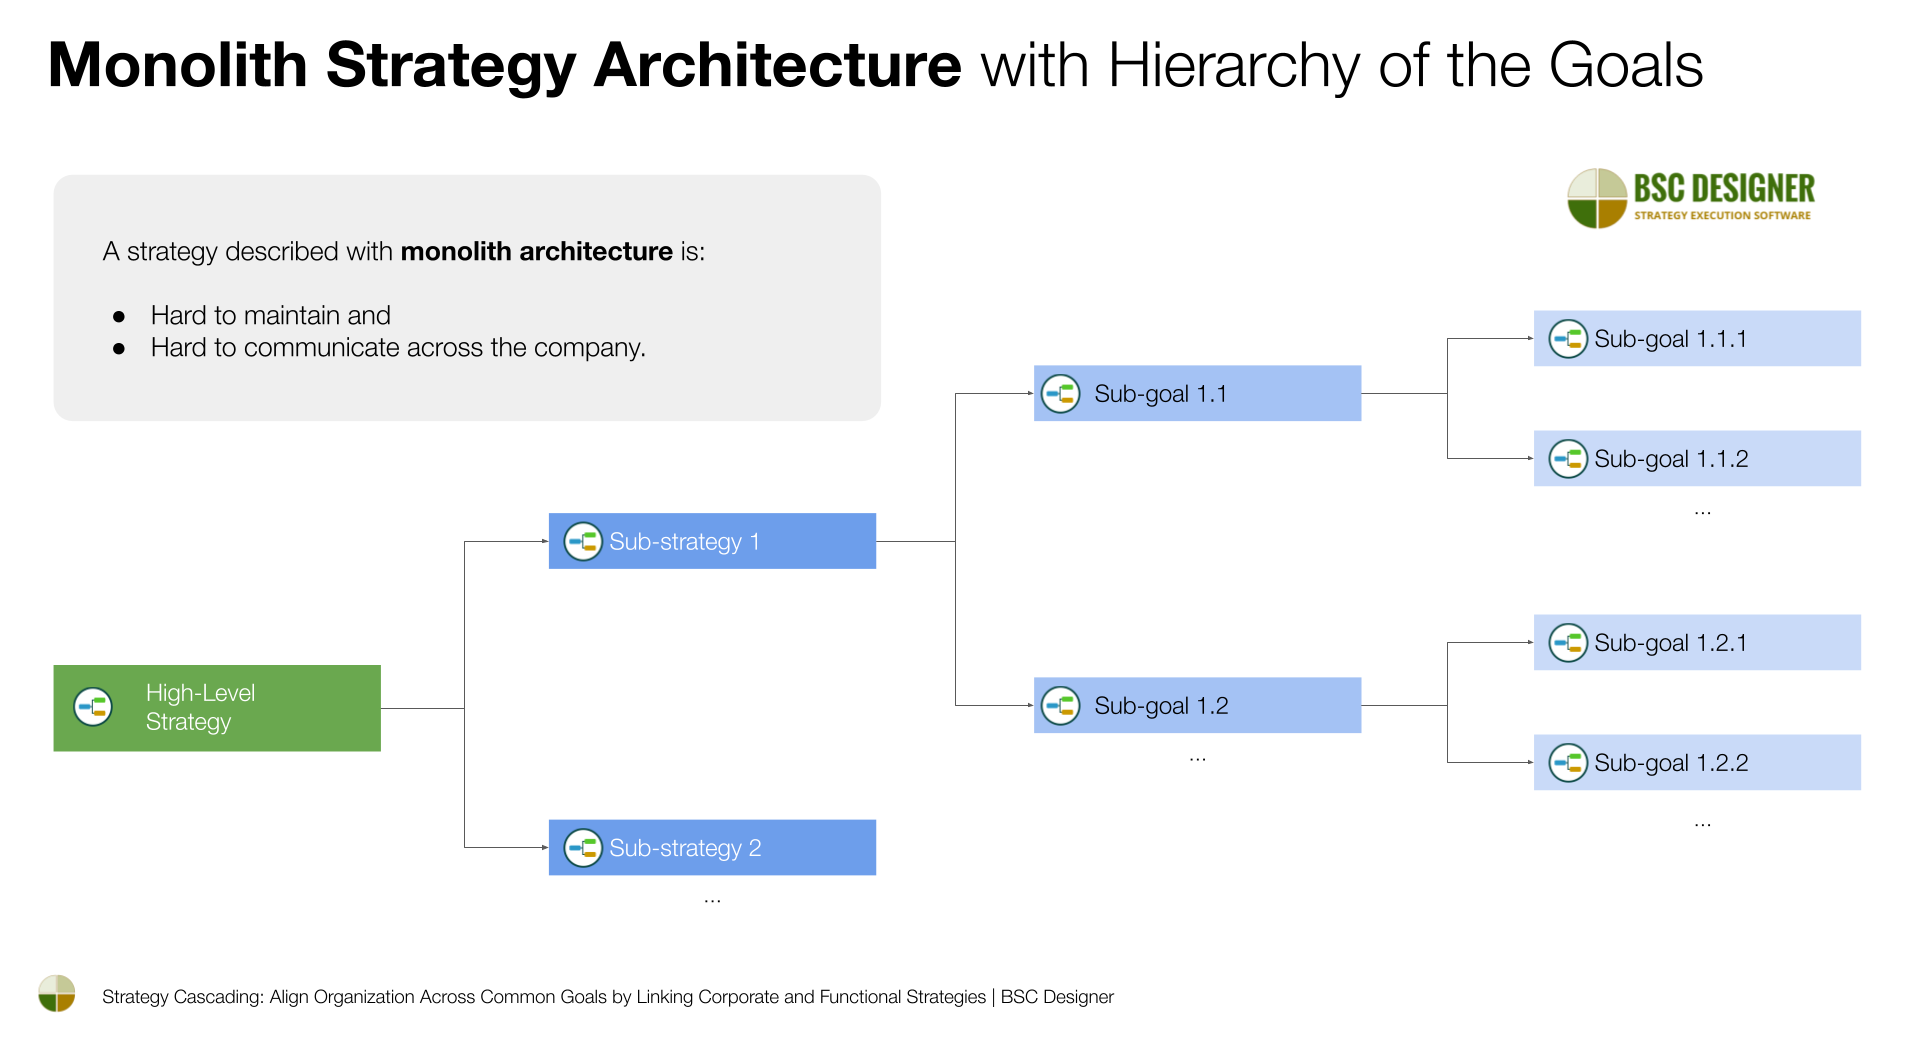 Monolith Strategy Architecture with Hierarchy of the Goals